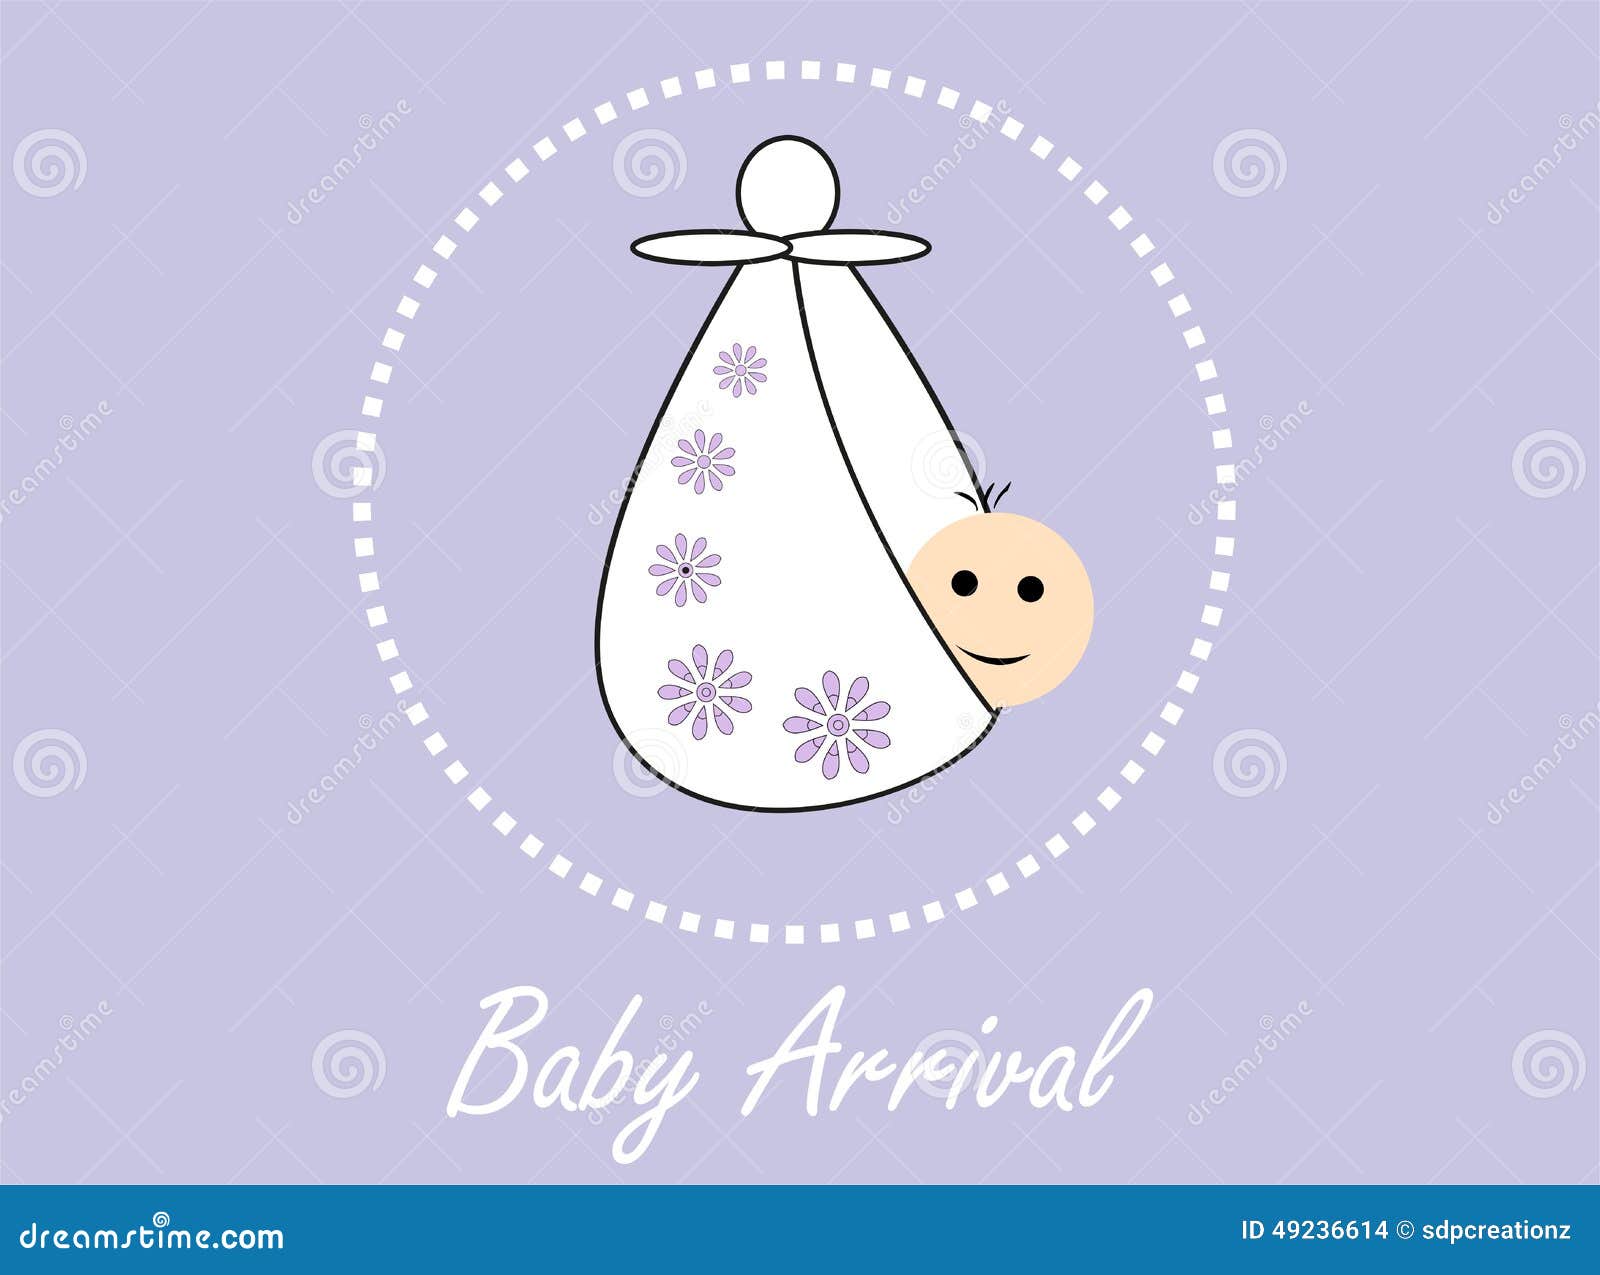 new arrival clipart - photo #49